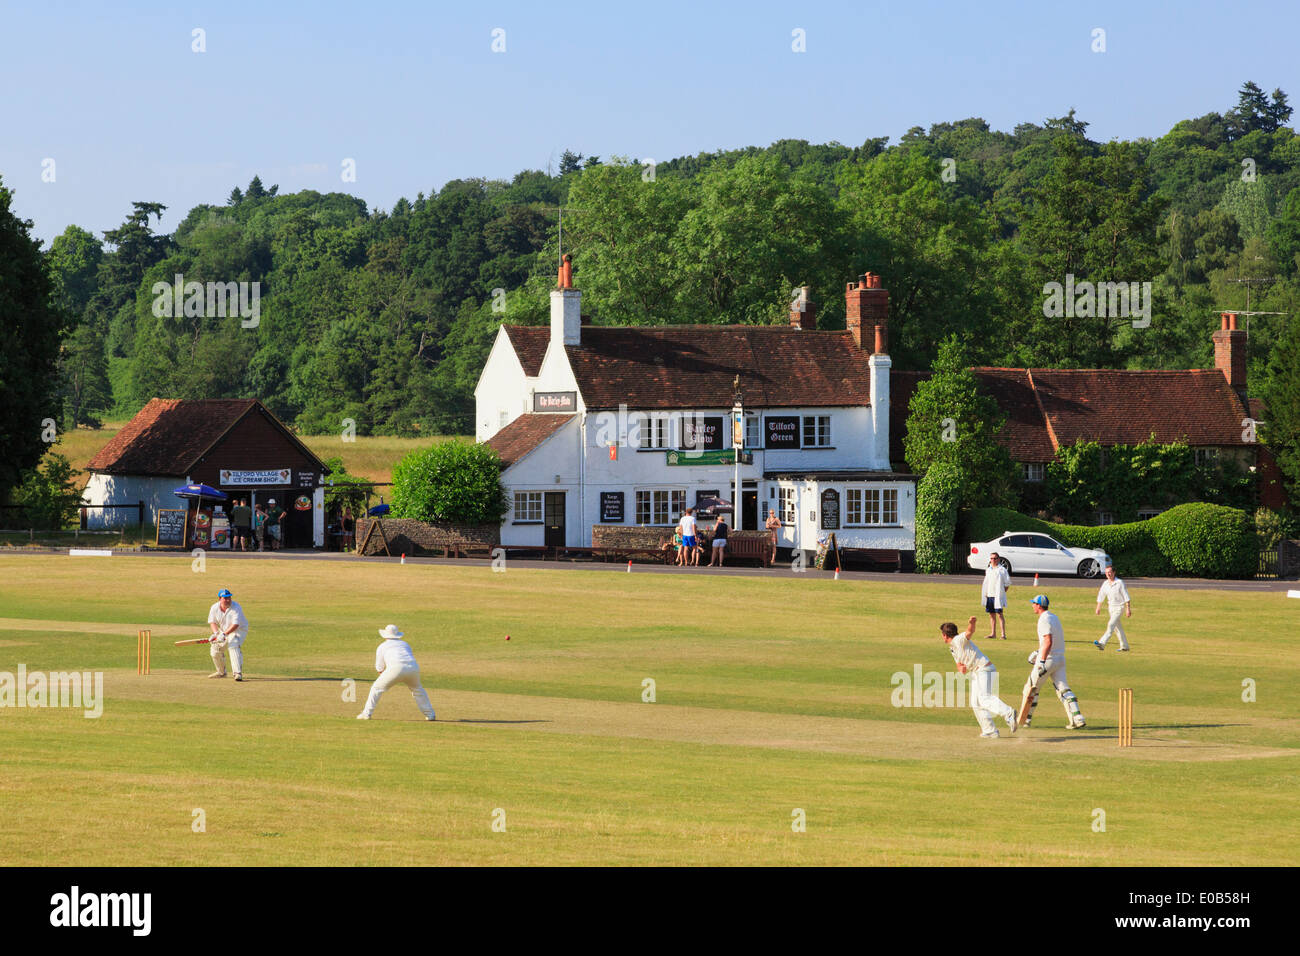 Country life local teams playing a cricket match on a village green in front of Barley Mow pub on a summer's evening. Tilford Surrey England UK Stock Photo